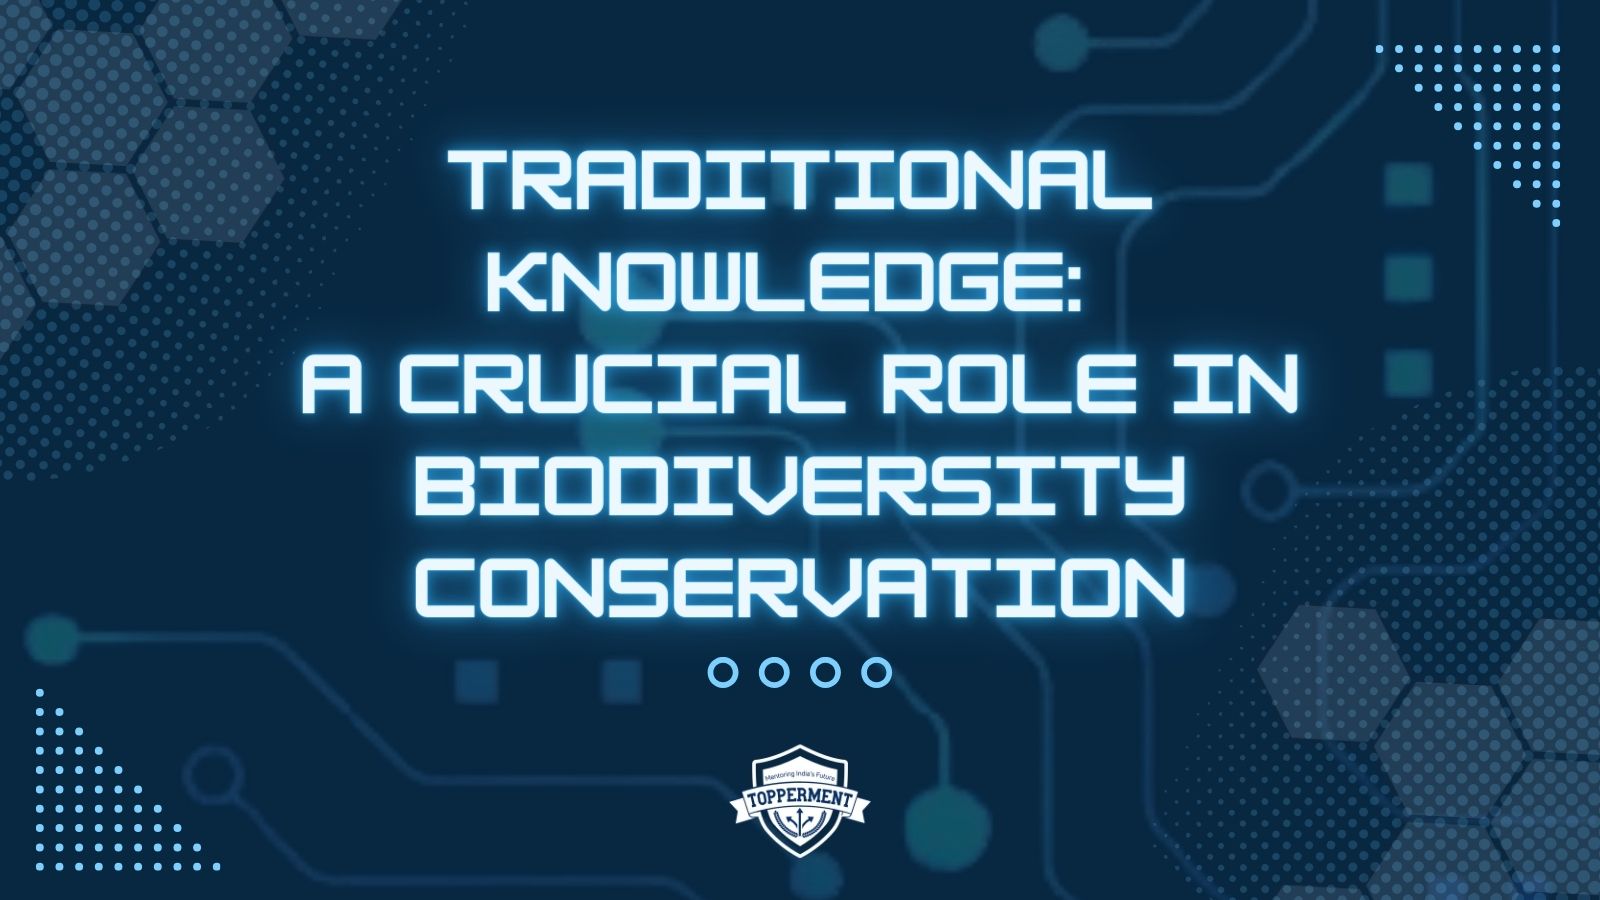 Traditional Knowledge: A Crucial Role in Biodiversity Conservation-TopperMent